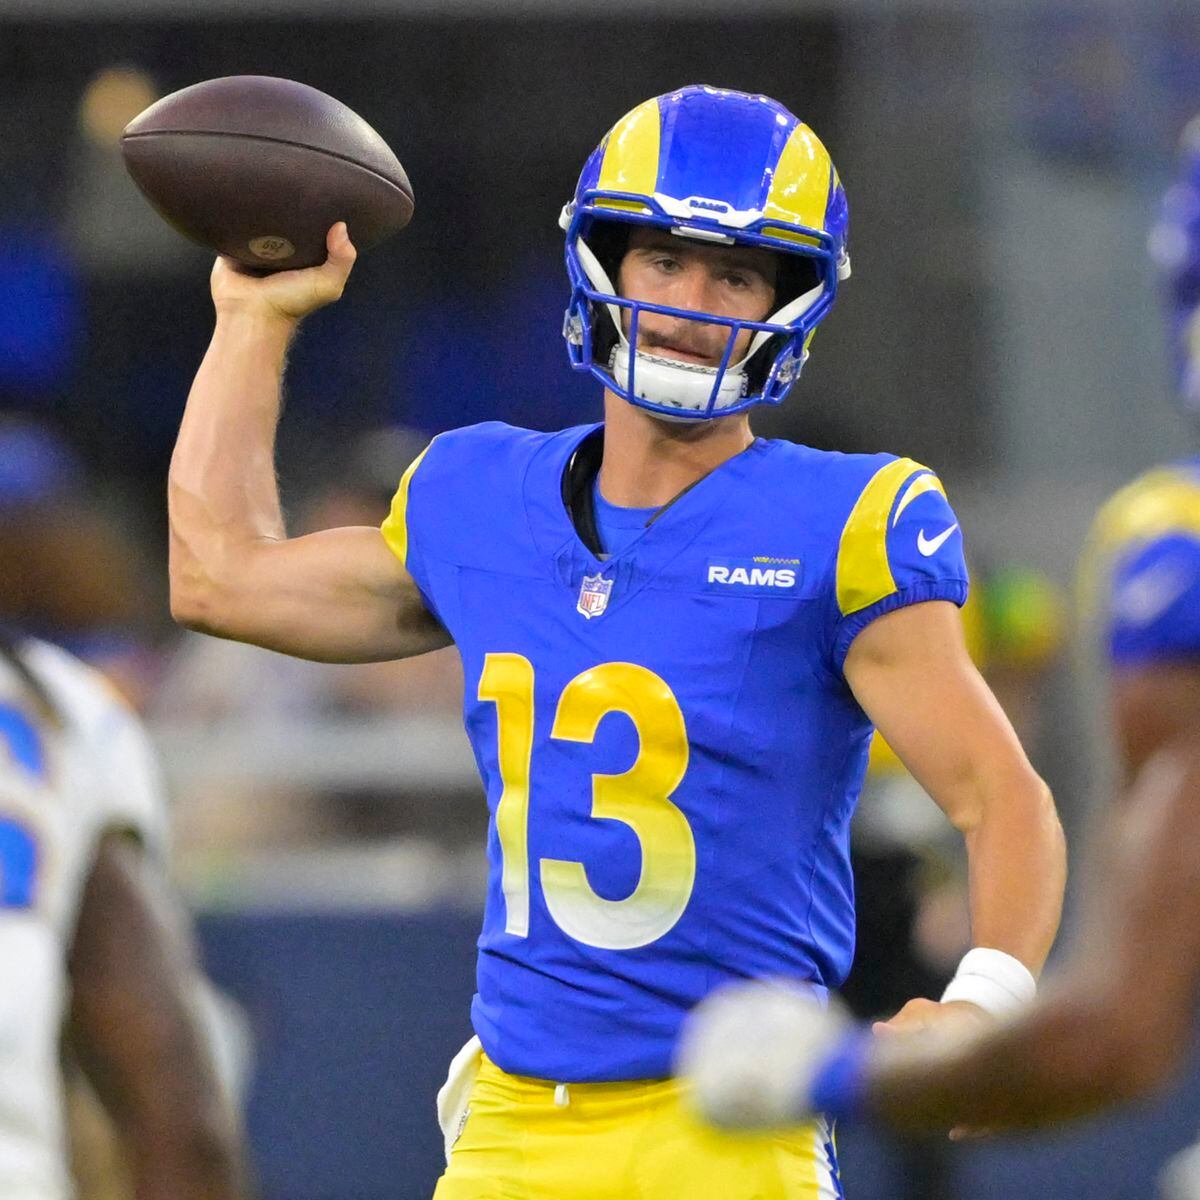 Stetson Bennett gets his first NFL action for the Rams